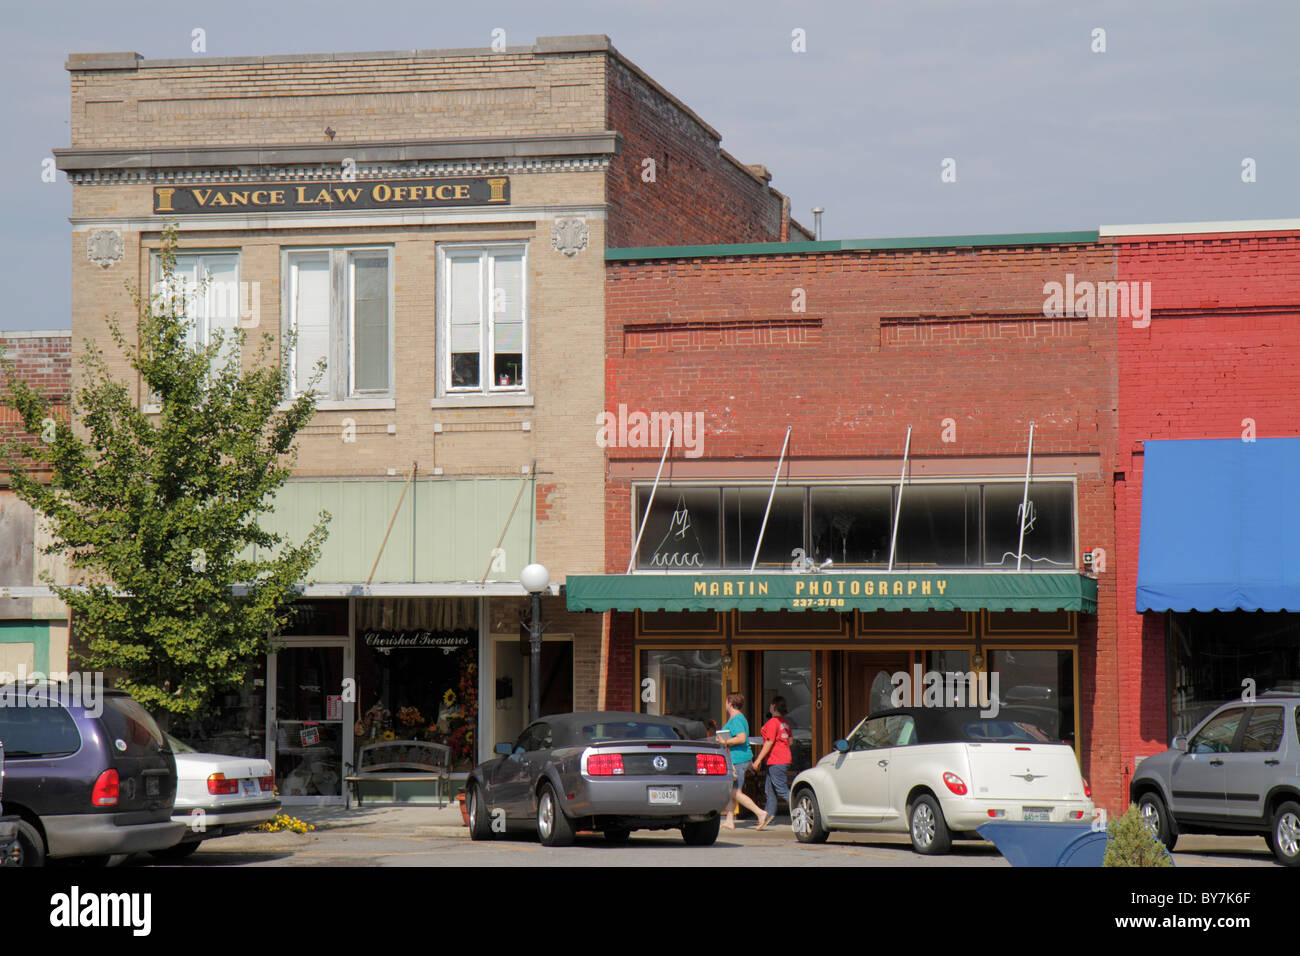 Tennessee Watertown,small town,historic district,building,law office,photography studio,outside exterior,front,entrance,facade,brick,parked car,Americ Stock Photo